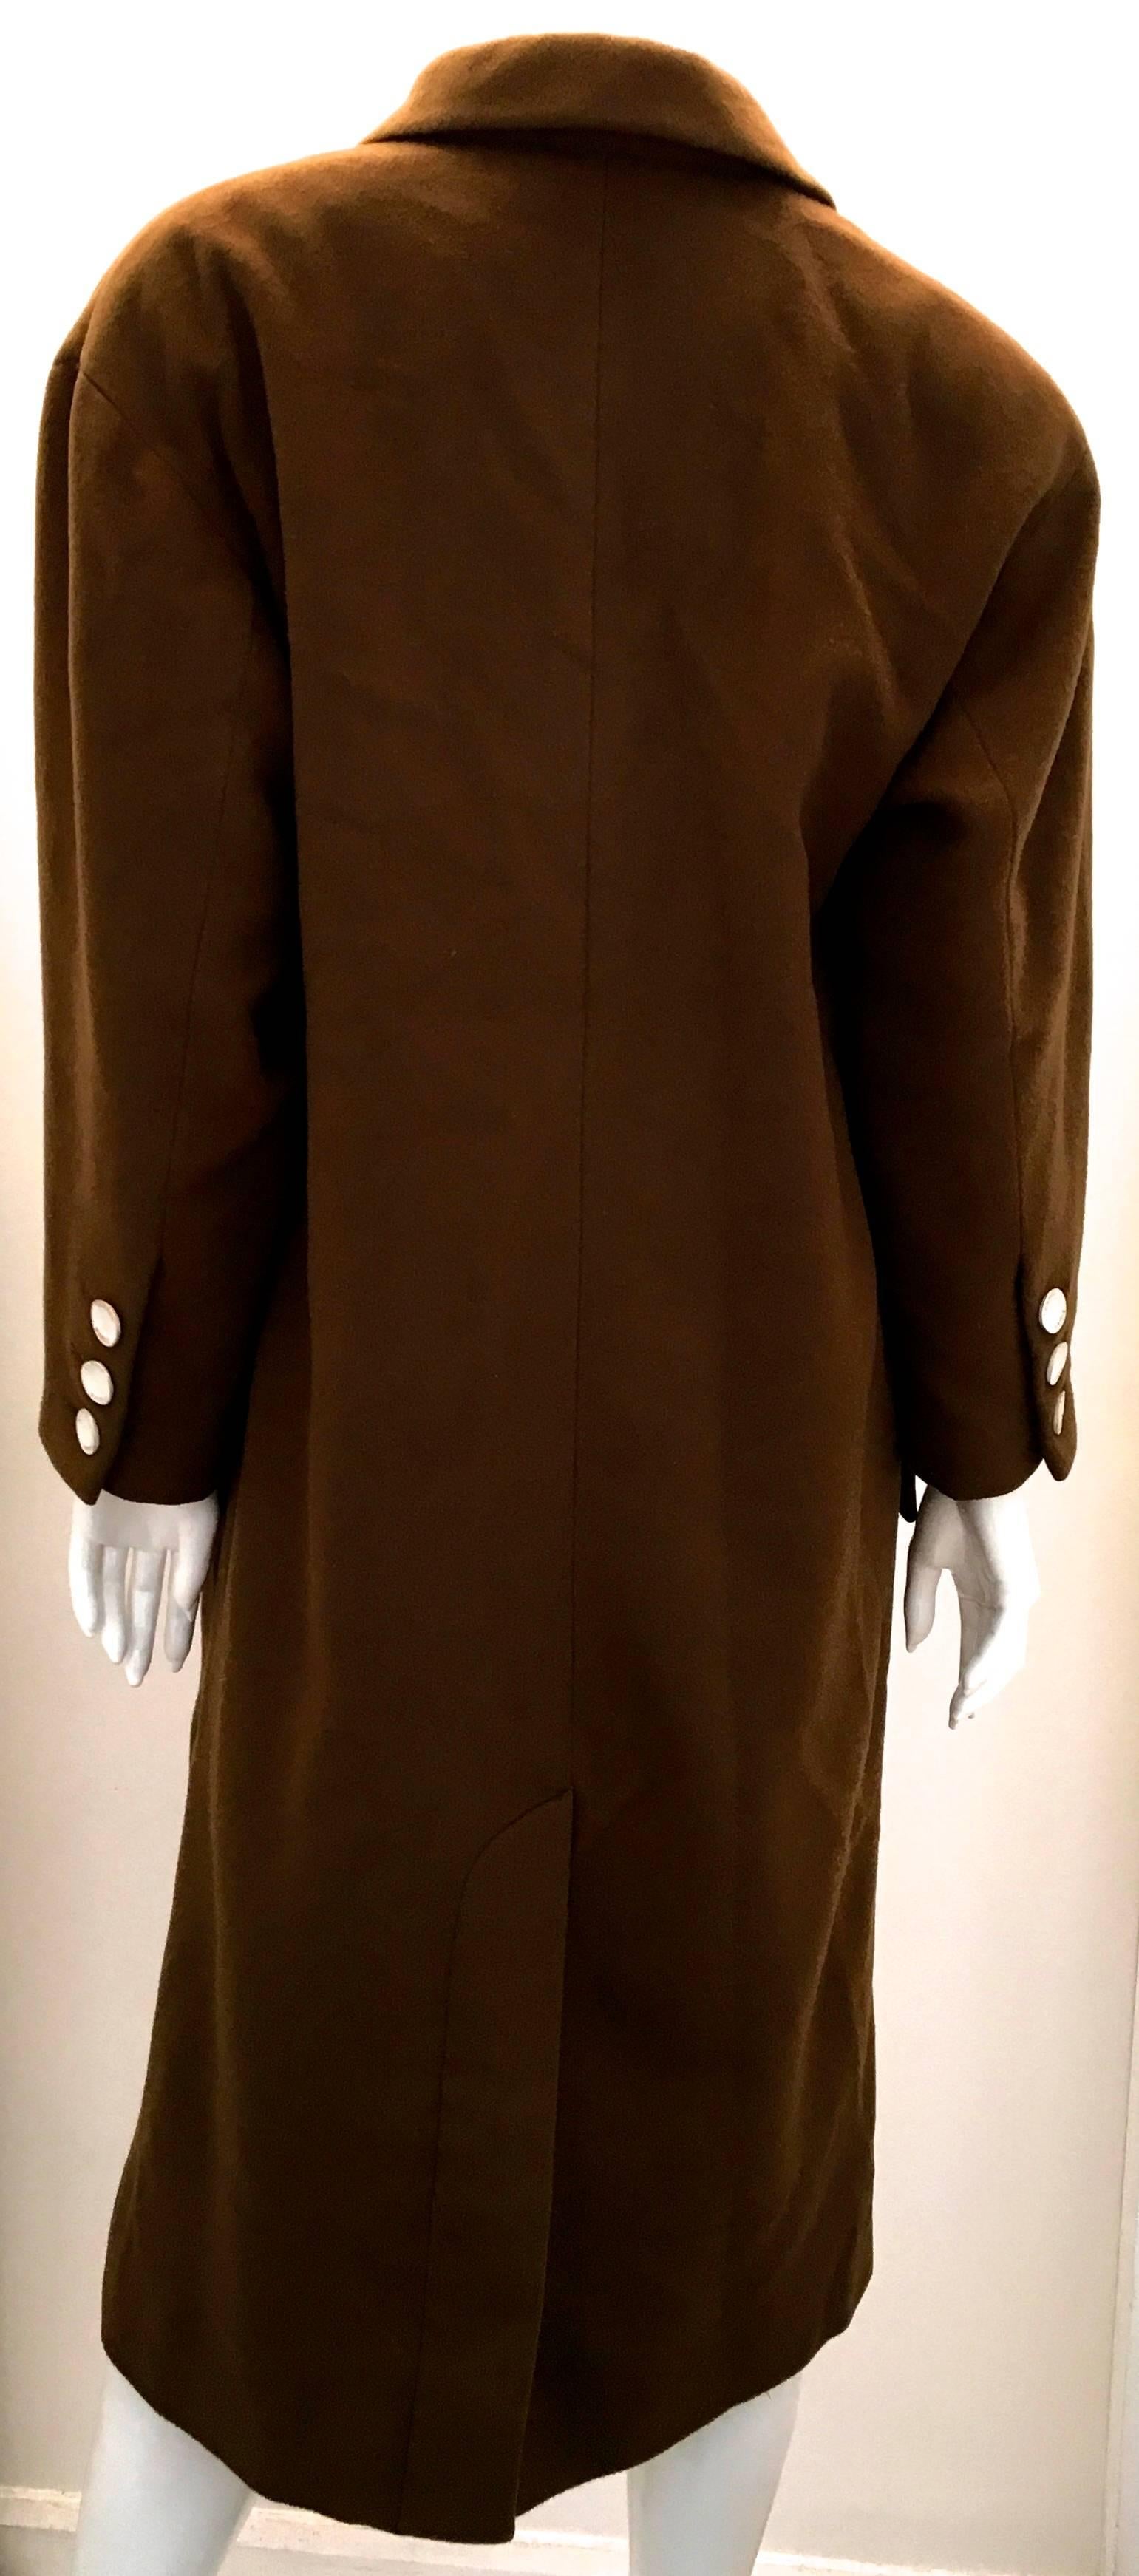 Presented here is a magnificent tobacco brown cashmere coat from Chanel. The coat is made of 100% cashmere. The coat is from the 1980’s, but has recently had the buttons replaced by Chanel. The buttons are made out of white enamel with gold toned